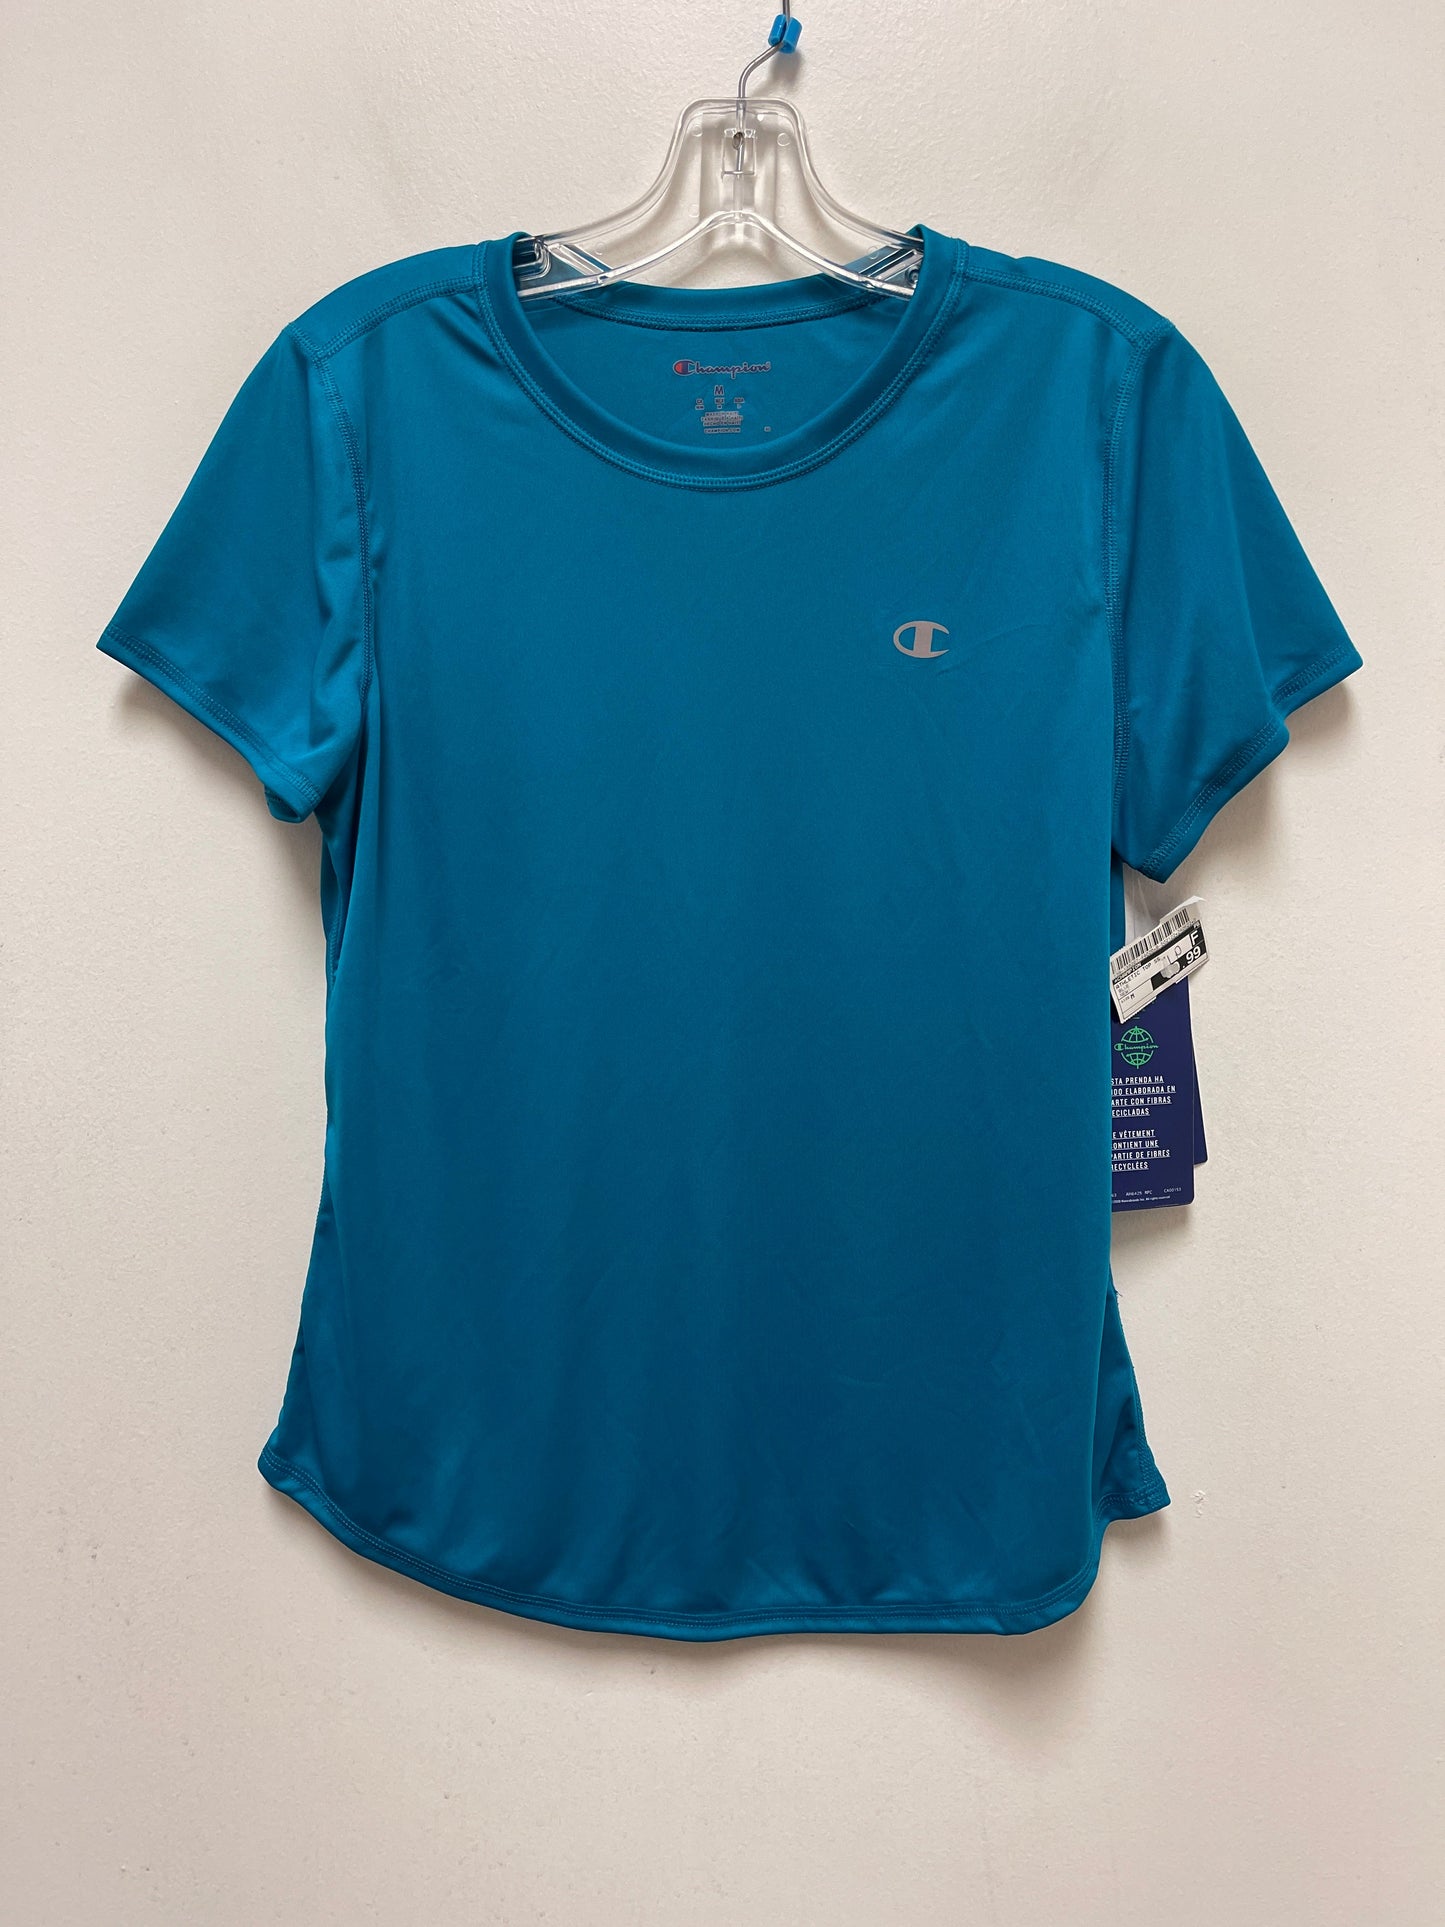 Blue Athletic Top Short Sleeve Champion, Size M